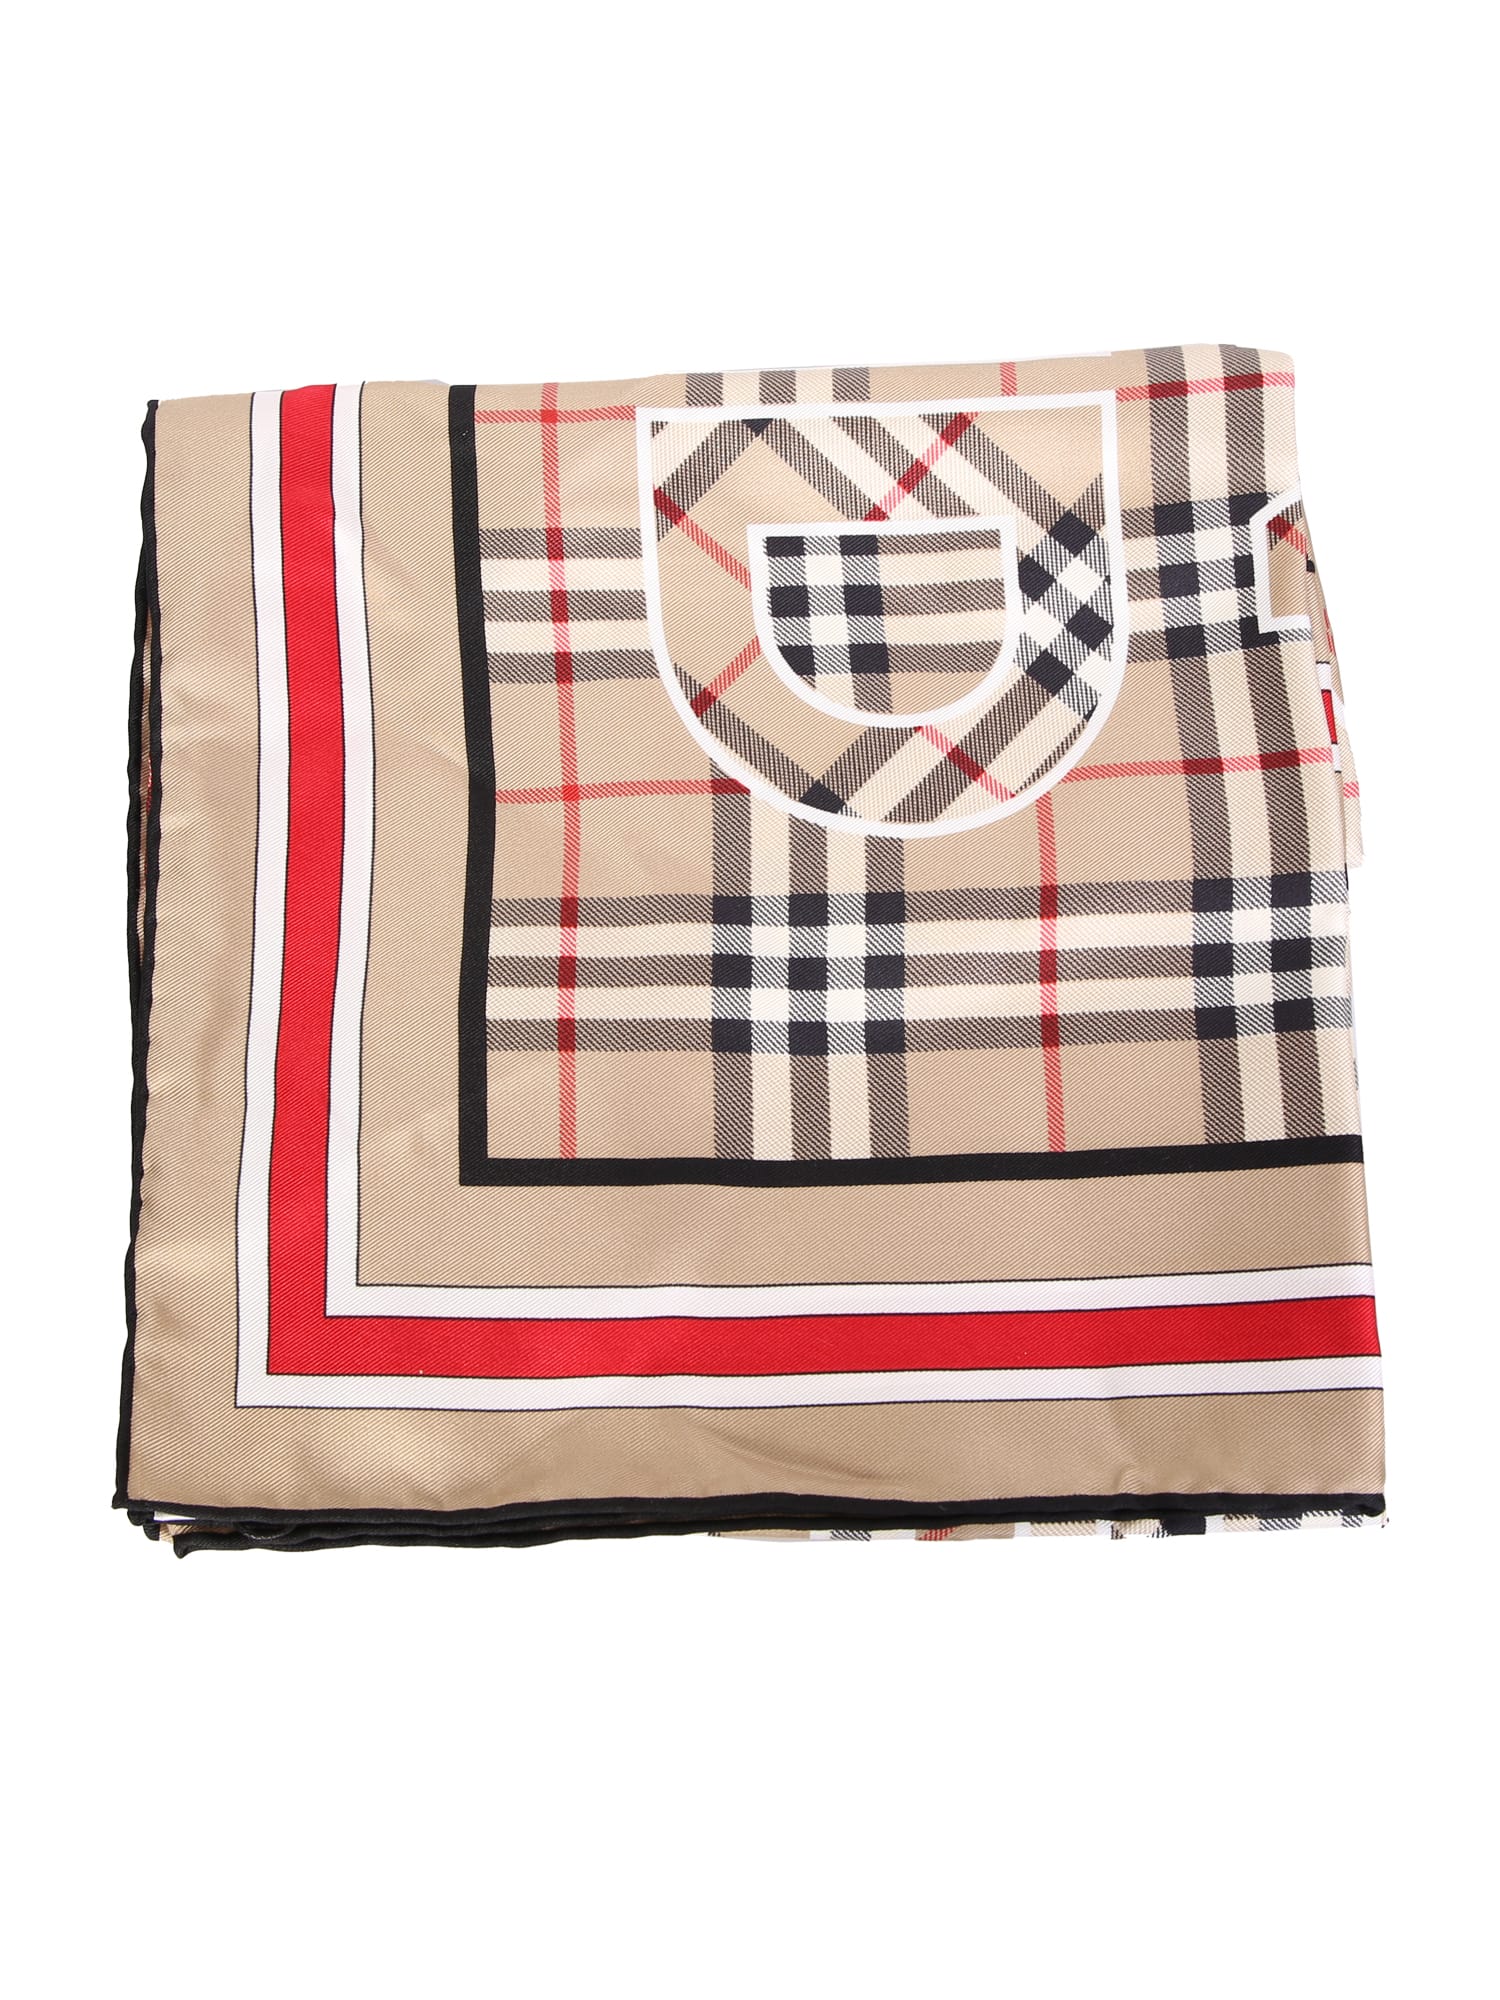 Burberry Vintage Check Logo Print Scarf. Iconic And Timeless Print, Making This Accessory An Undisputed Must